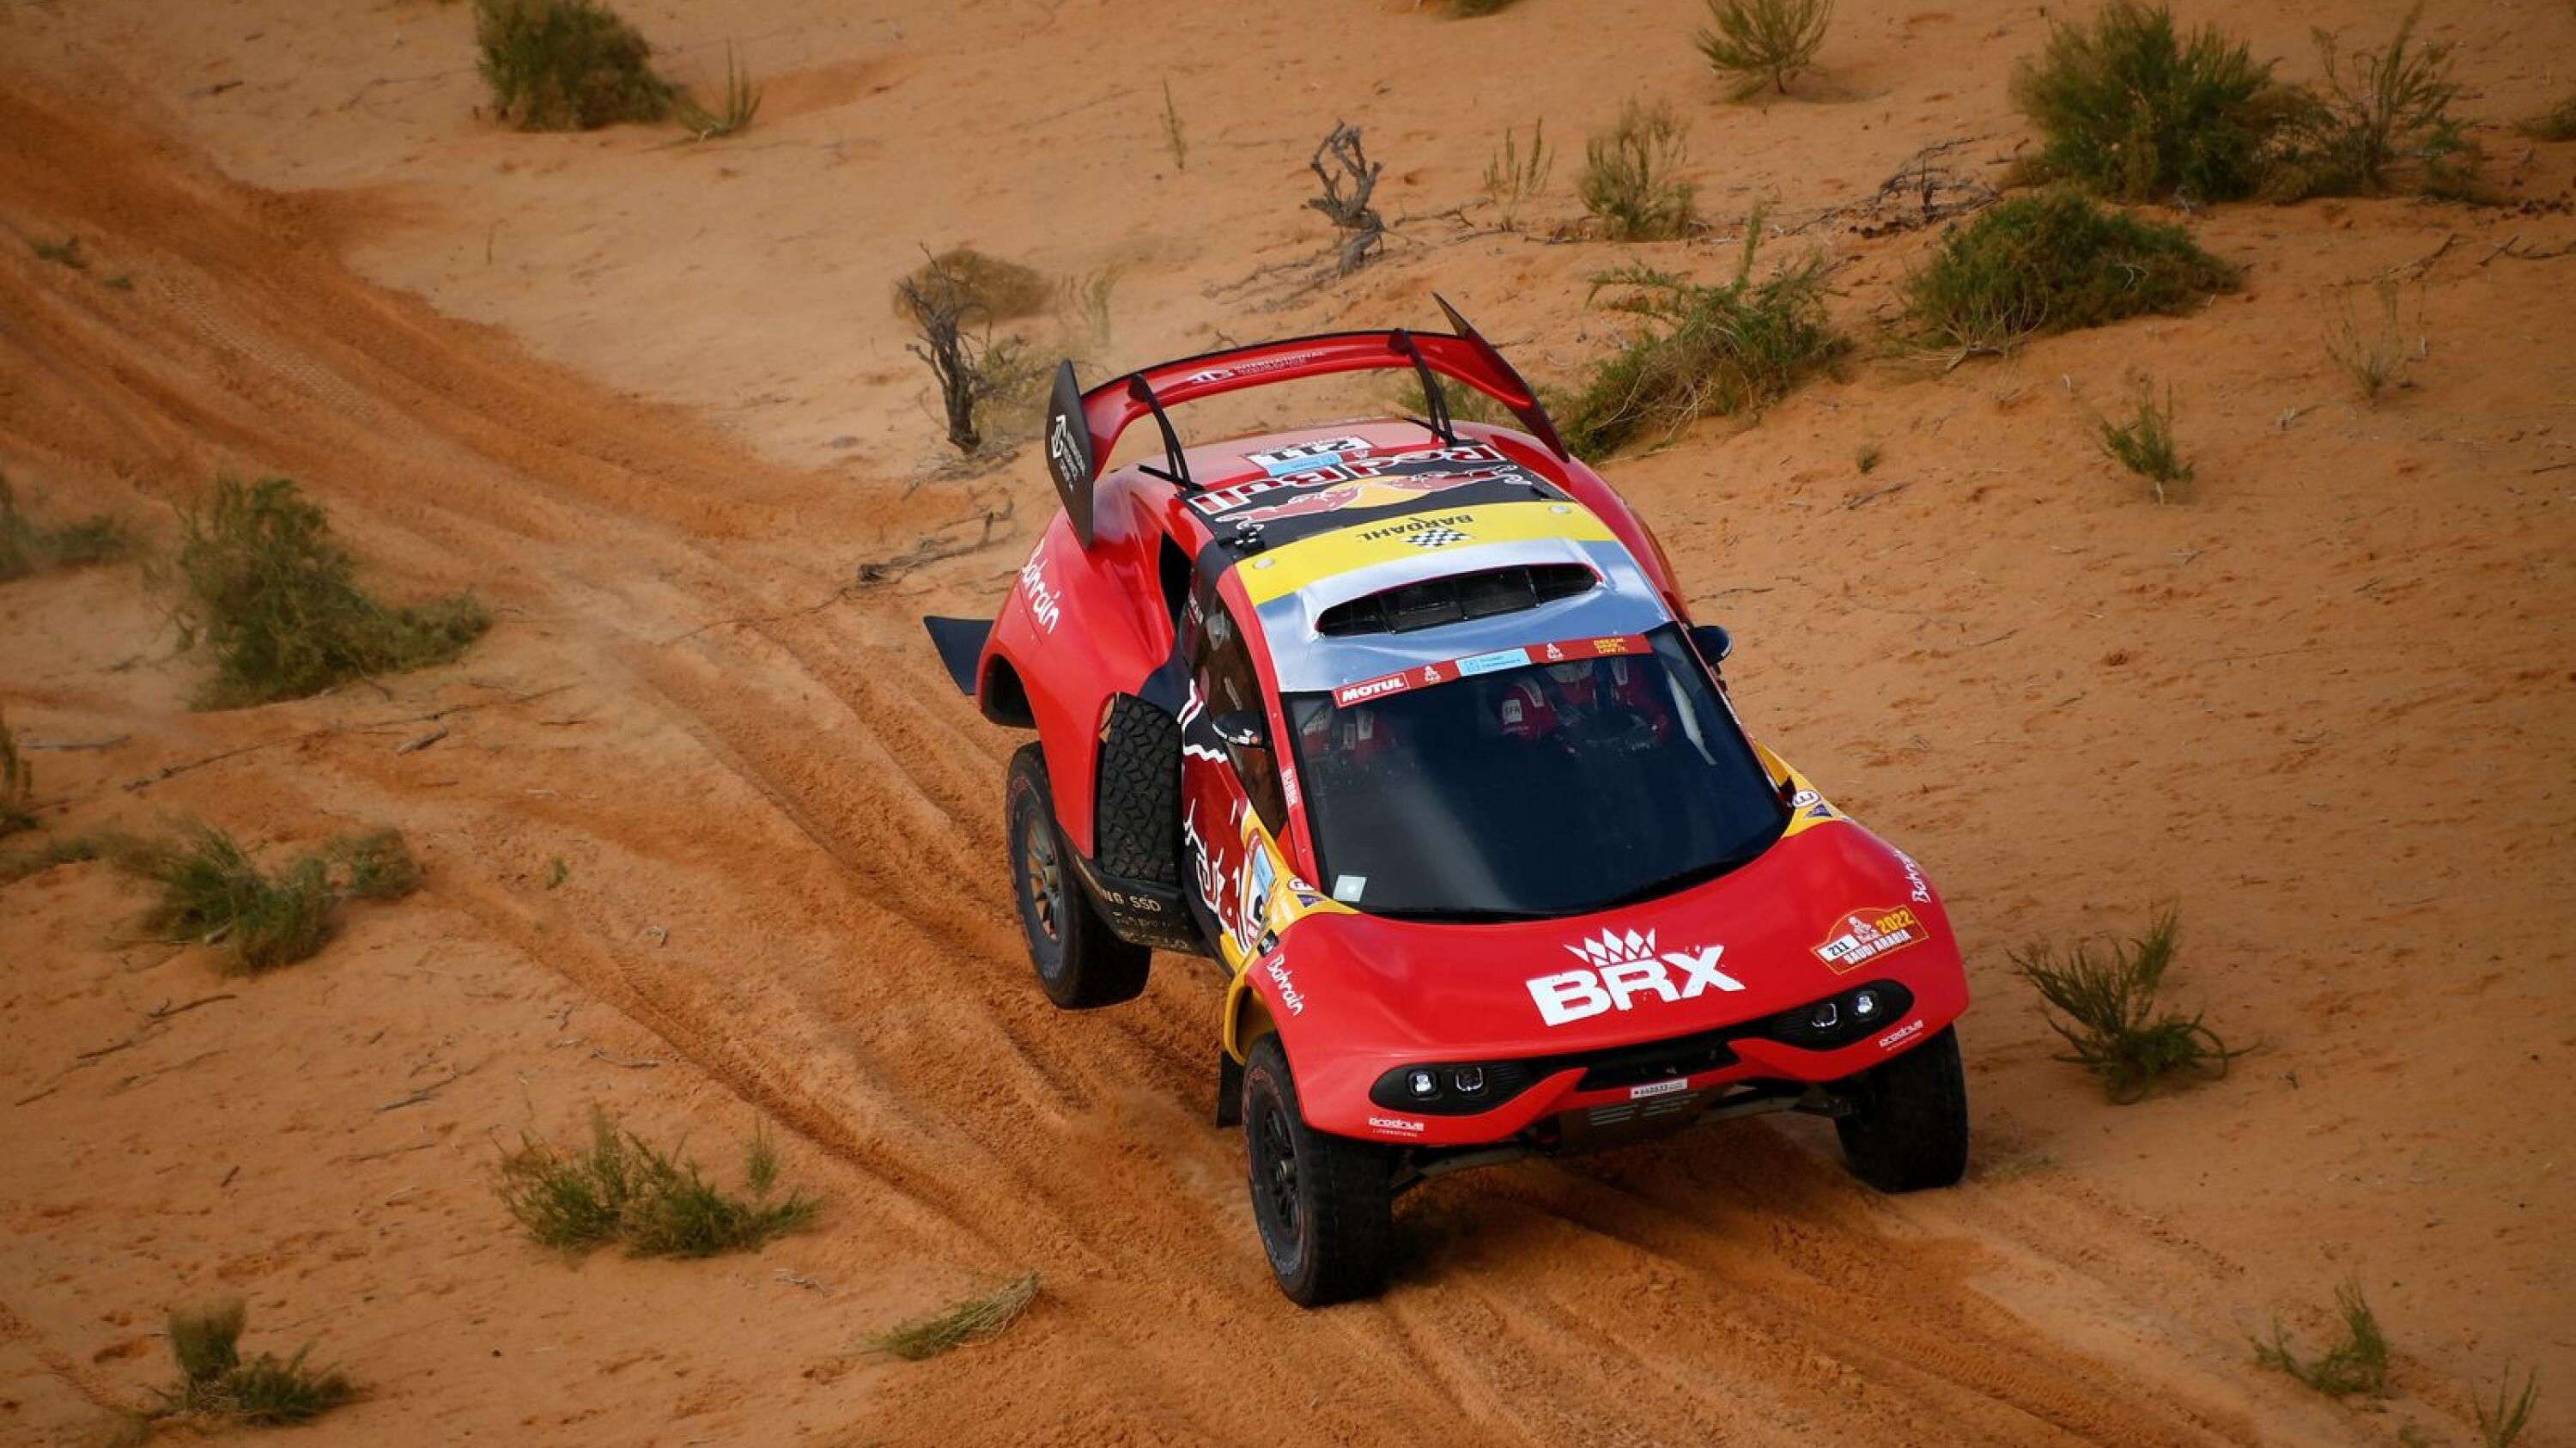 French driver Sebastien Loeb and co-driver Fabian Lurquin of Belgium compete during Stage 2 of the Dakar 2022 between Ha'il and al-Artawiya in Saudi Arabia on Monday